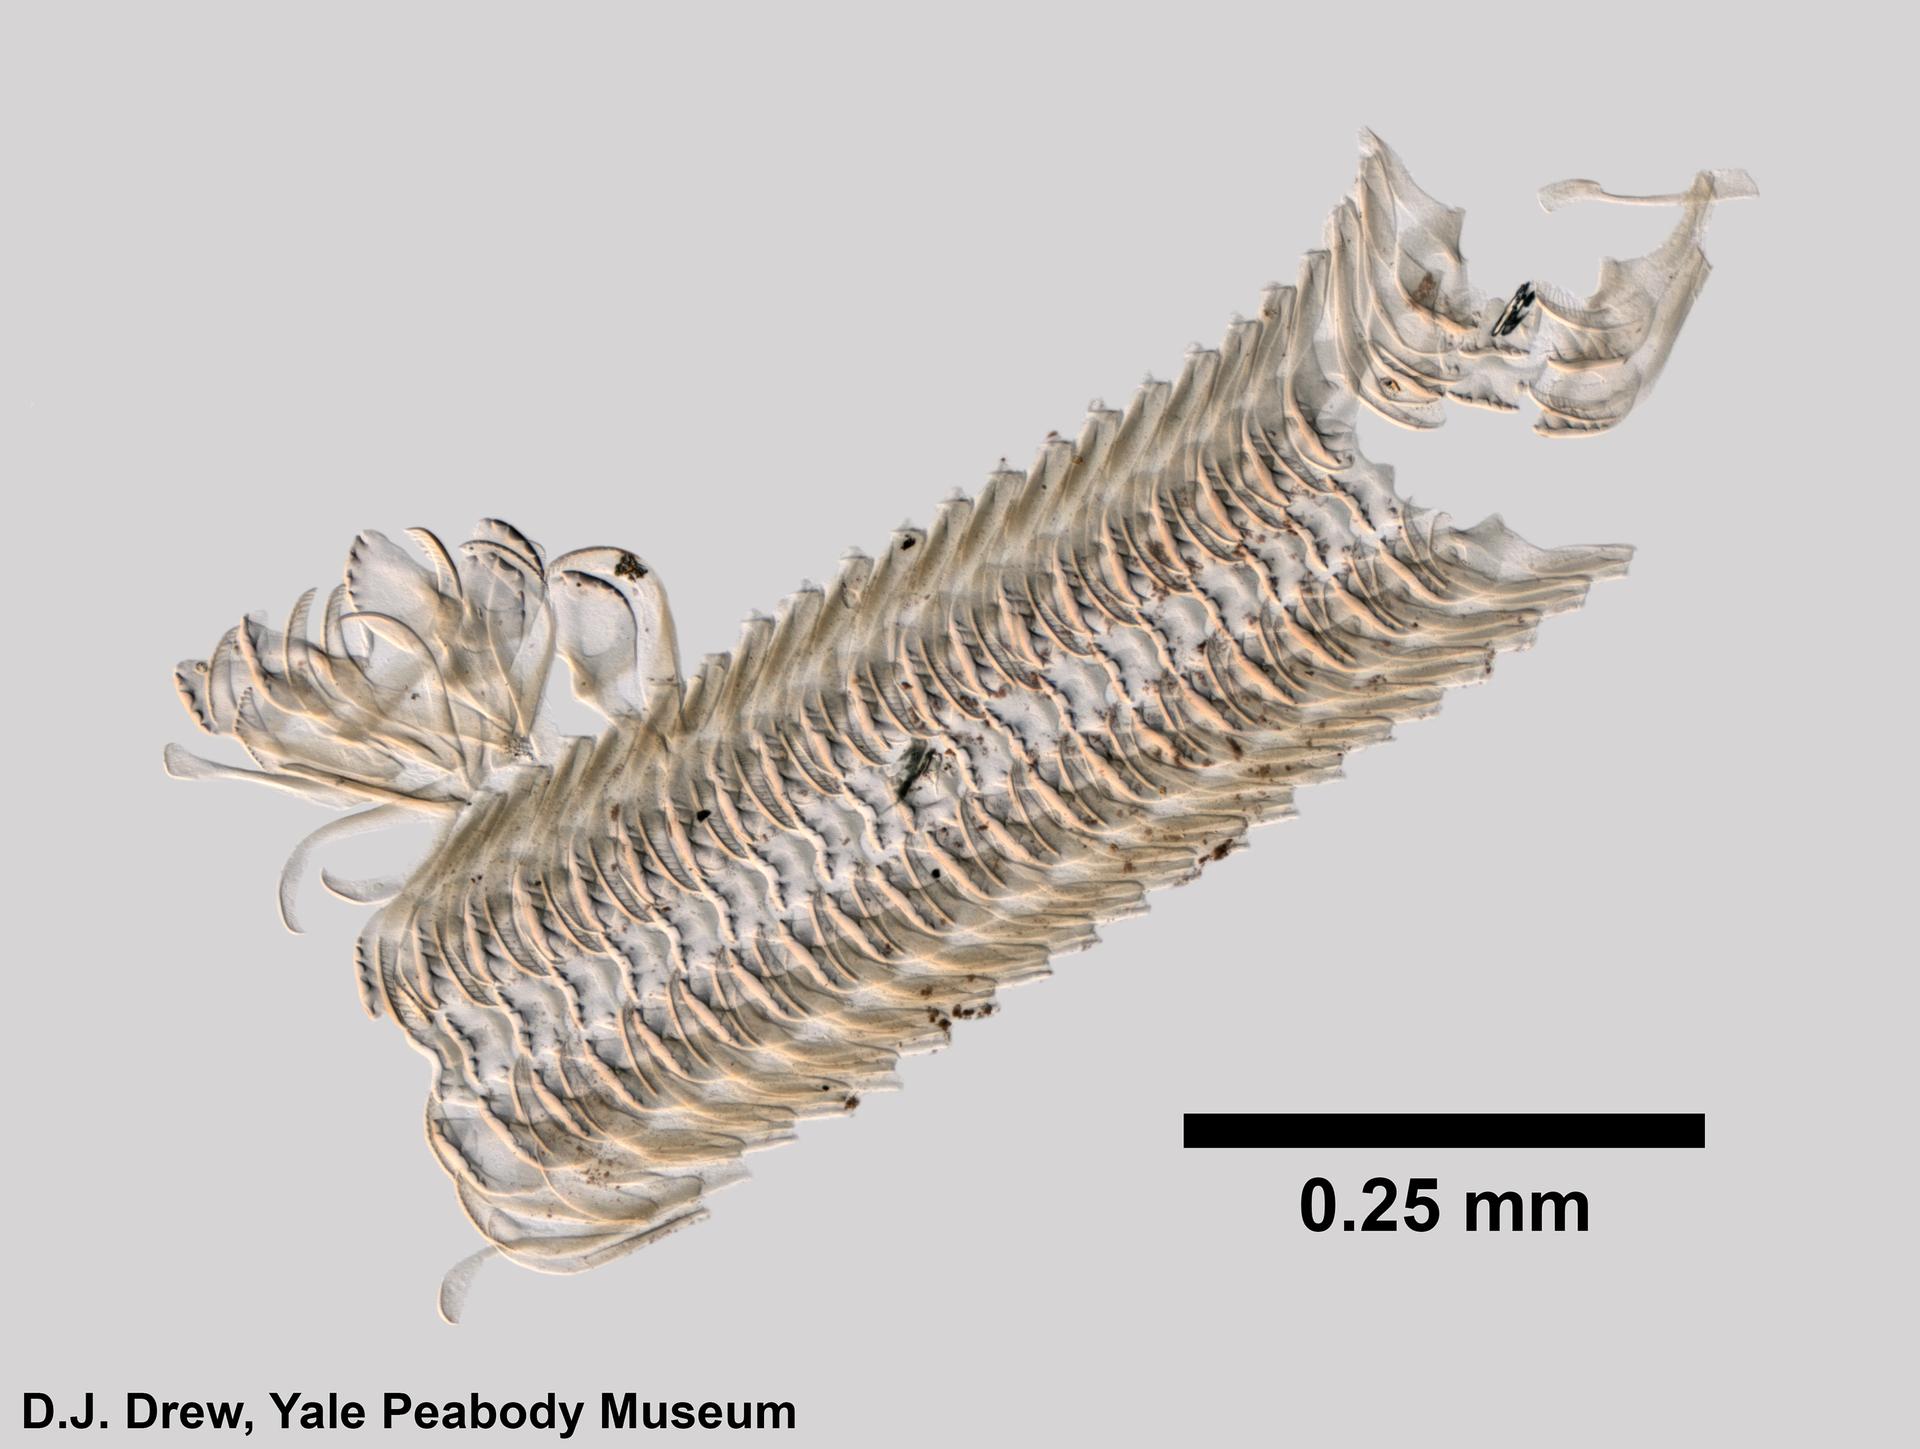 To Yale Peabody Museum of Natural History (YPM IZ 091216)